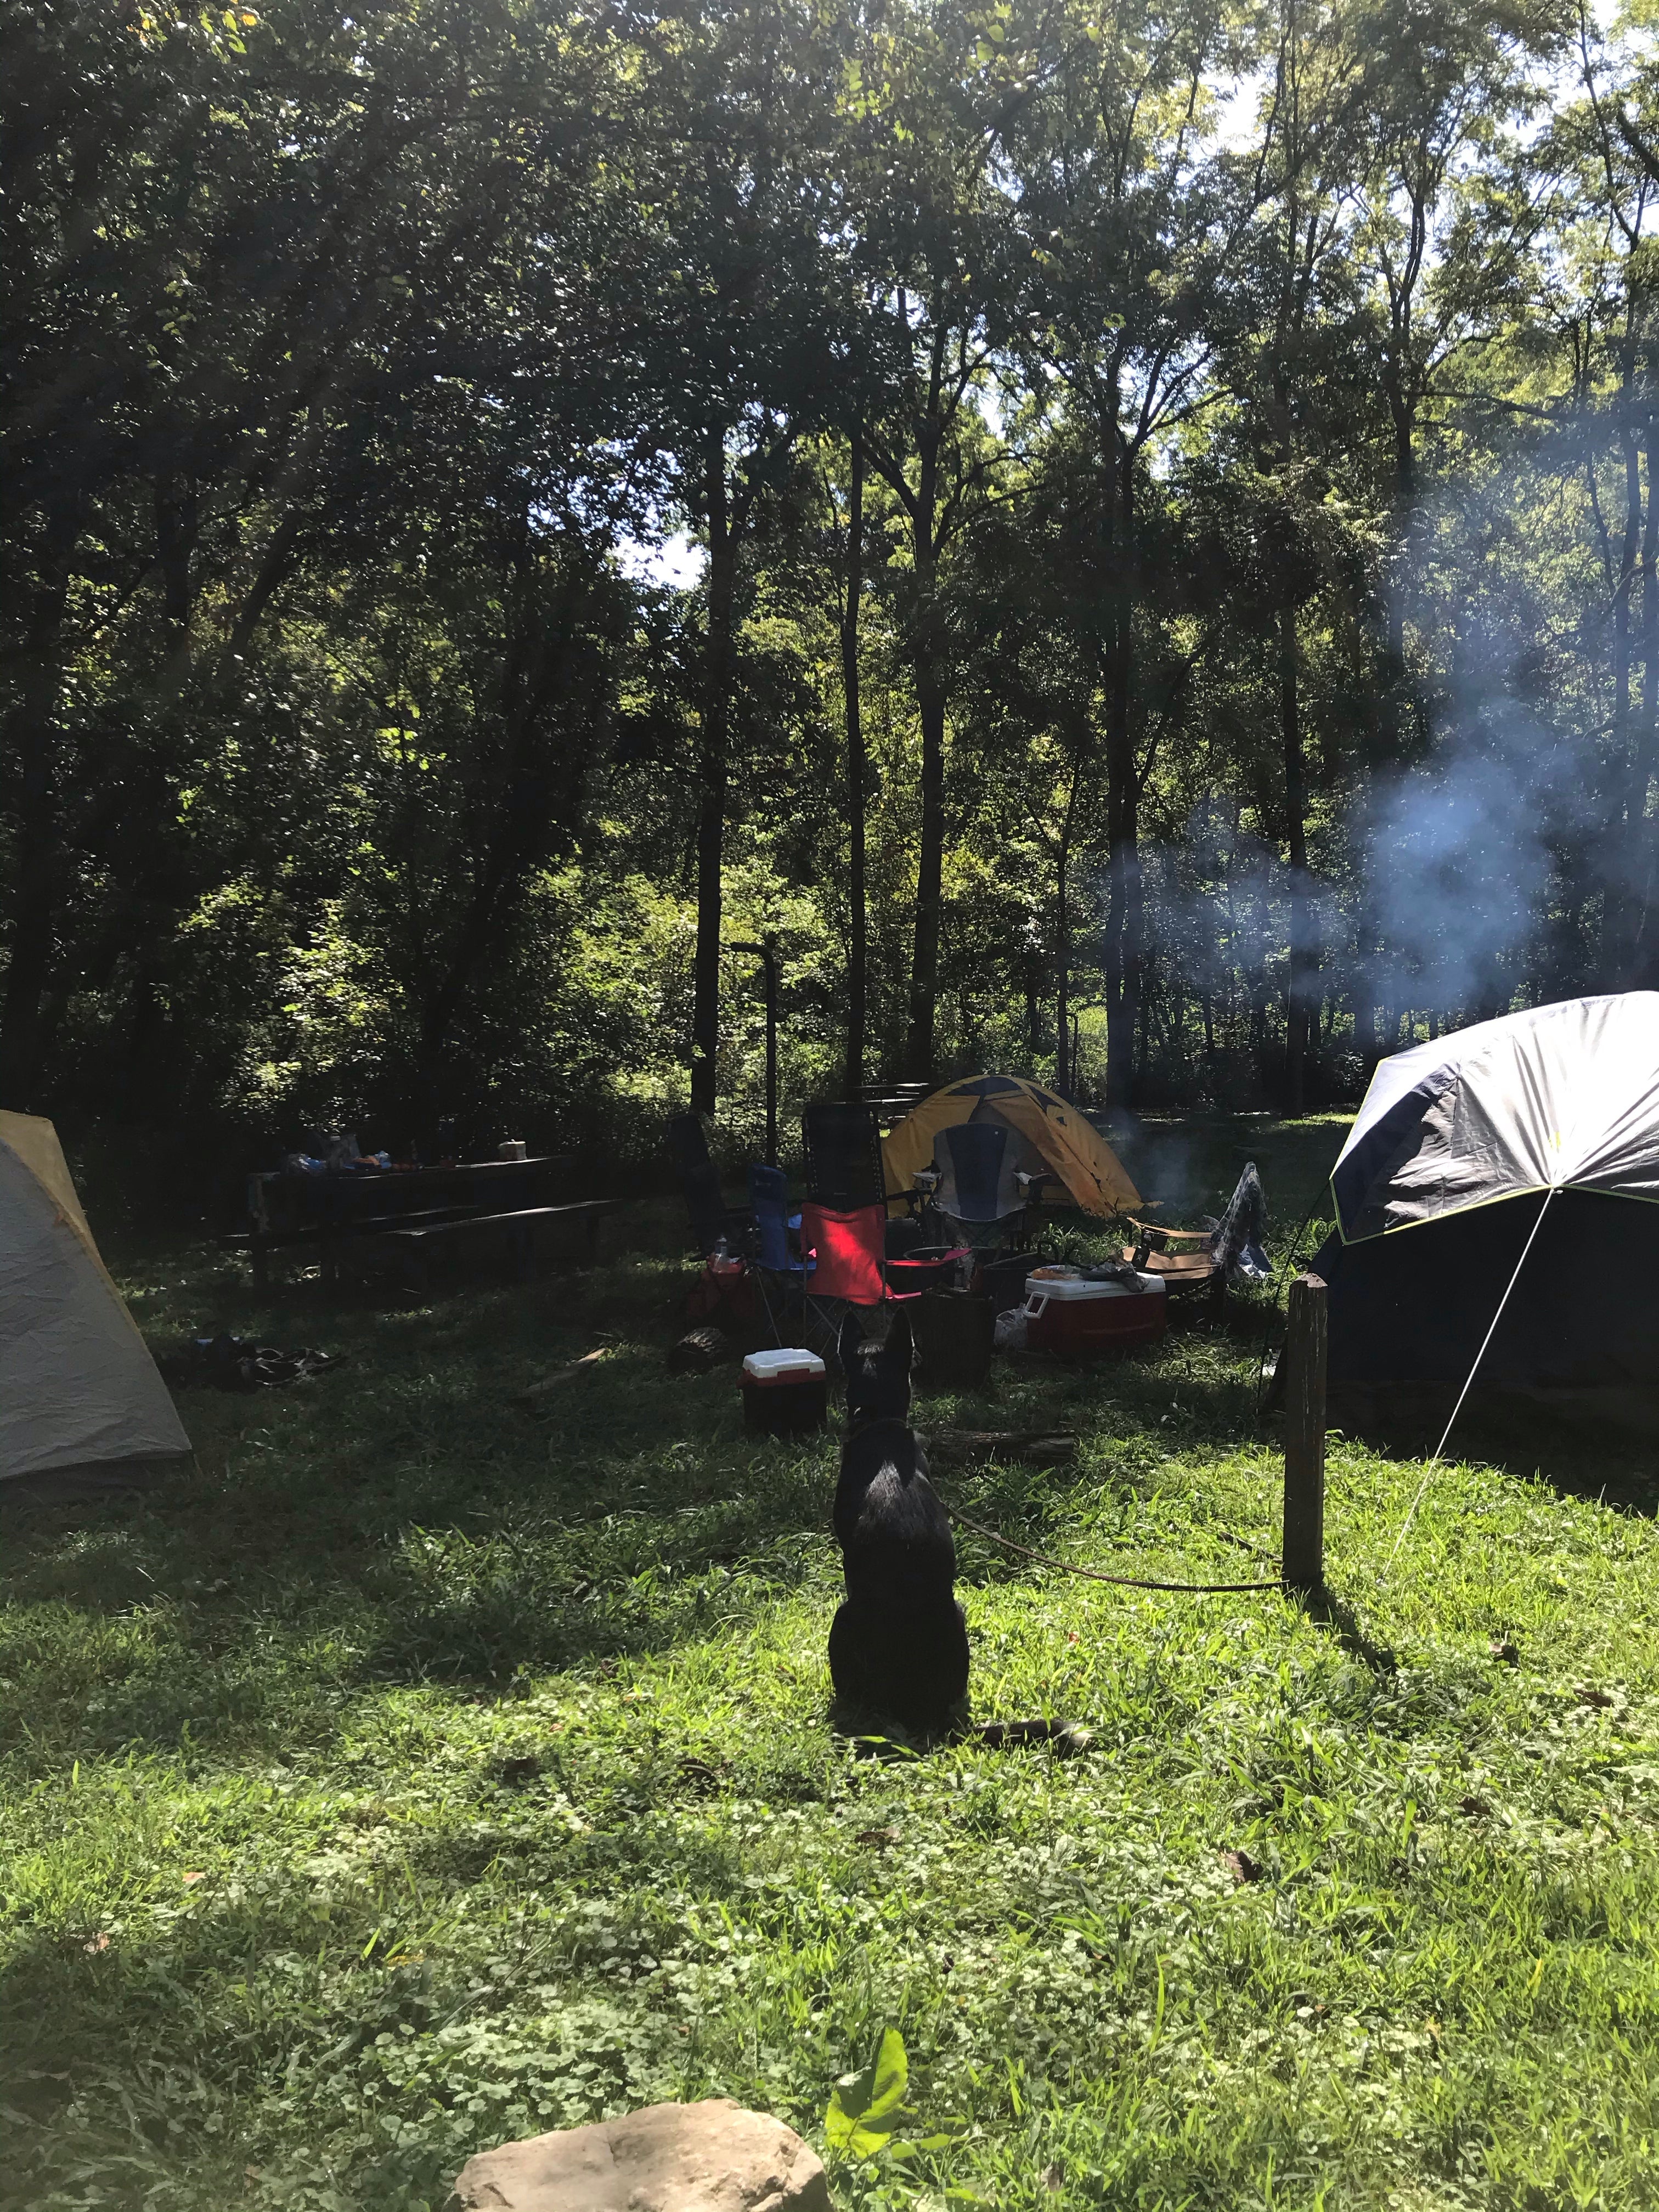 Camper submitted image from Hune Bridge Campground - 1